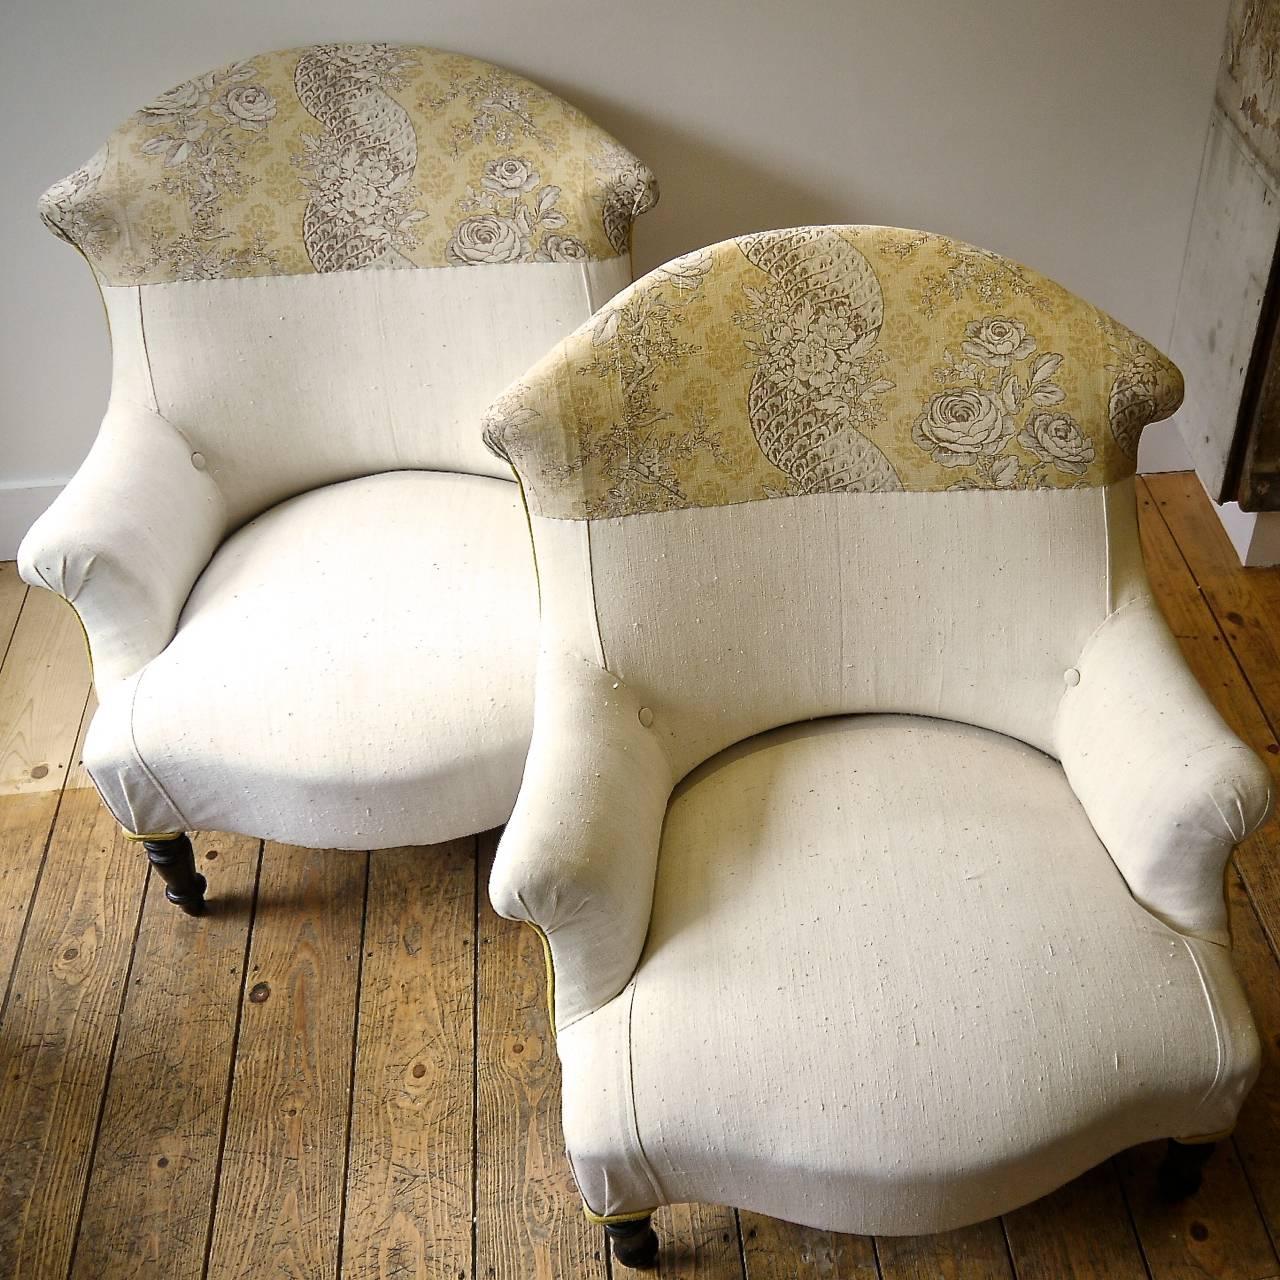 Pair of French Napoleon III armchairs stylishly covered in a 19th century French plain linen with the backs in a printed linen of roses and twisting columns of flowers .Contrasting piping of hand dyed saffron yellow linen.